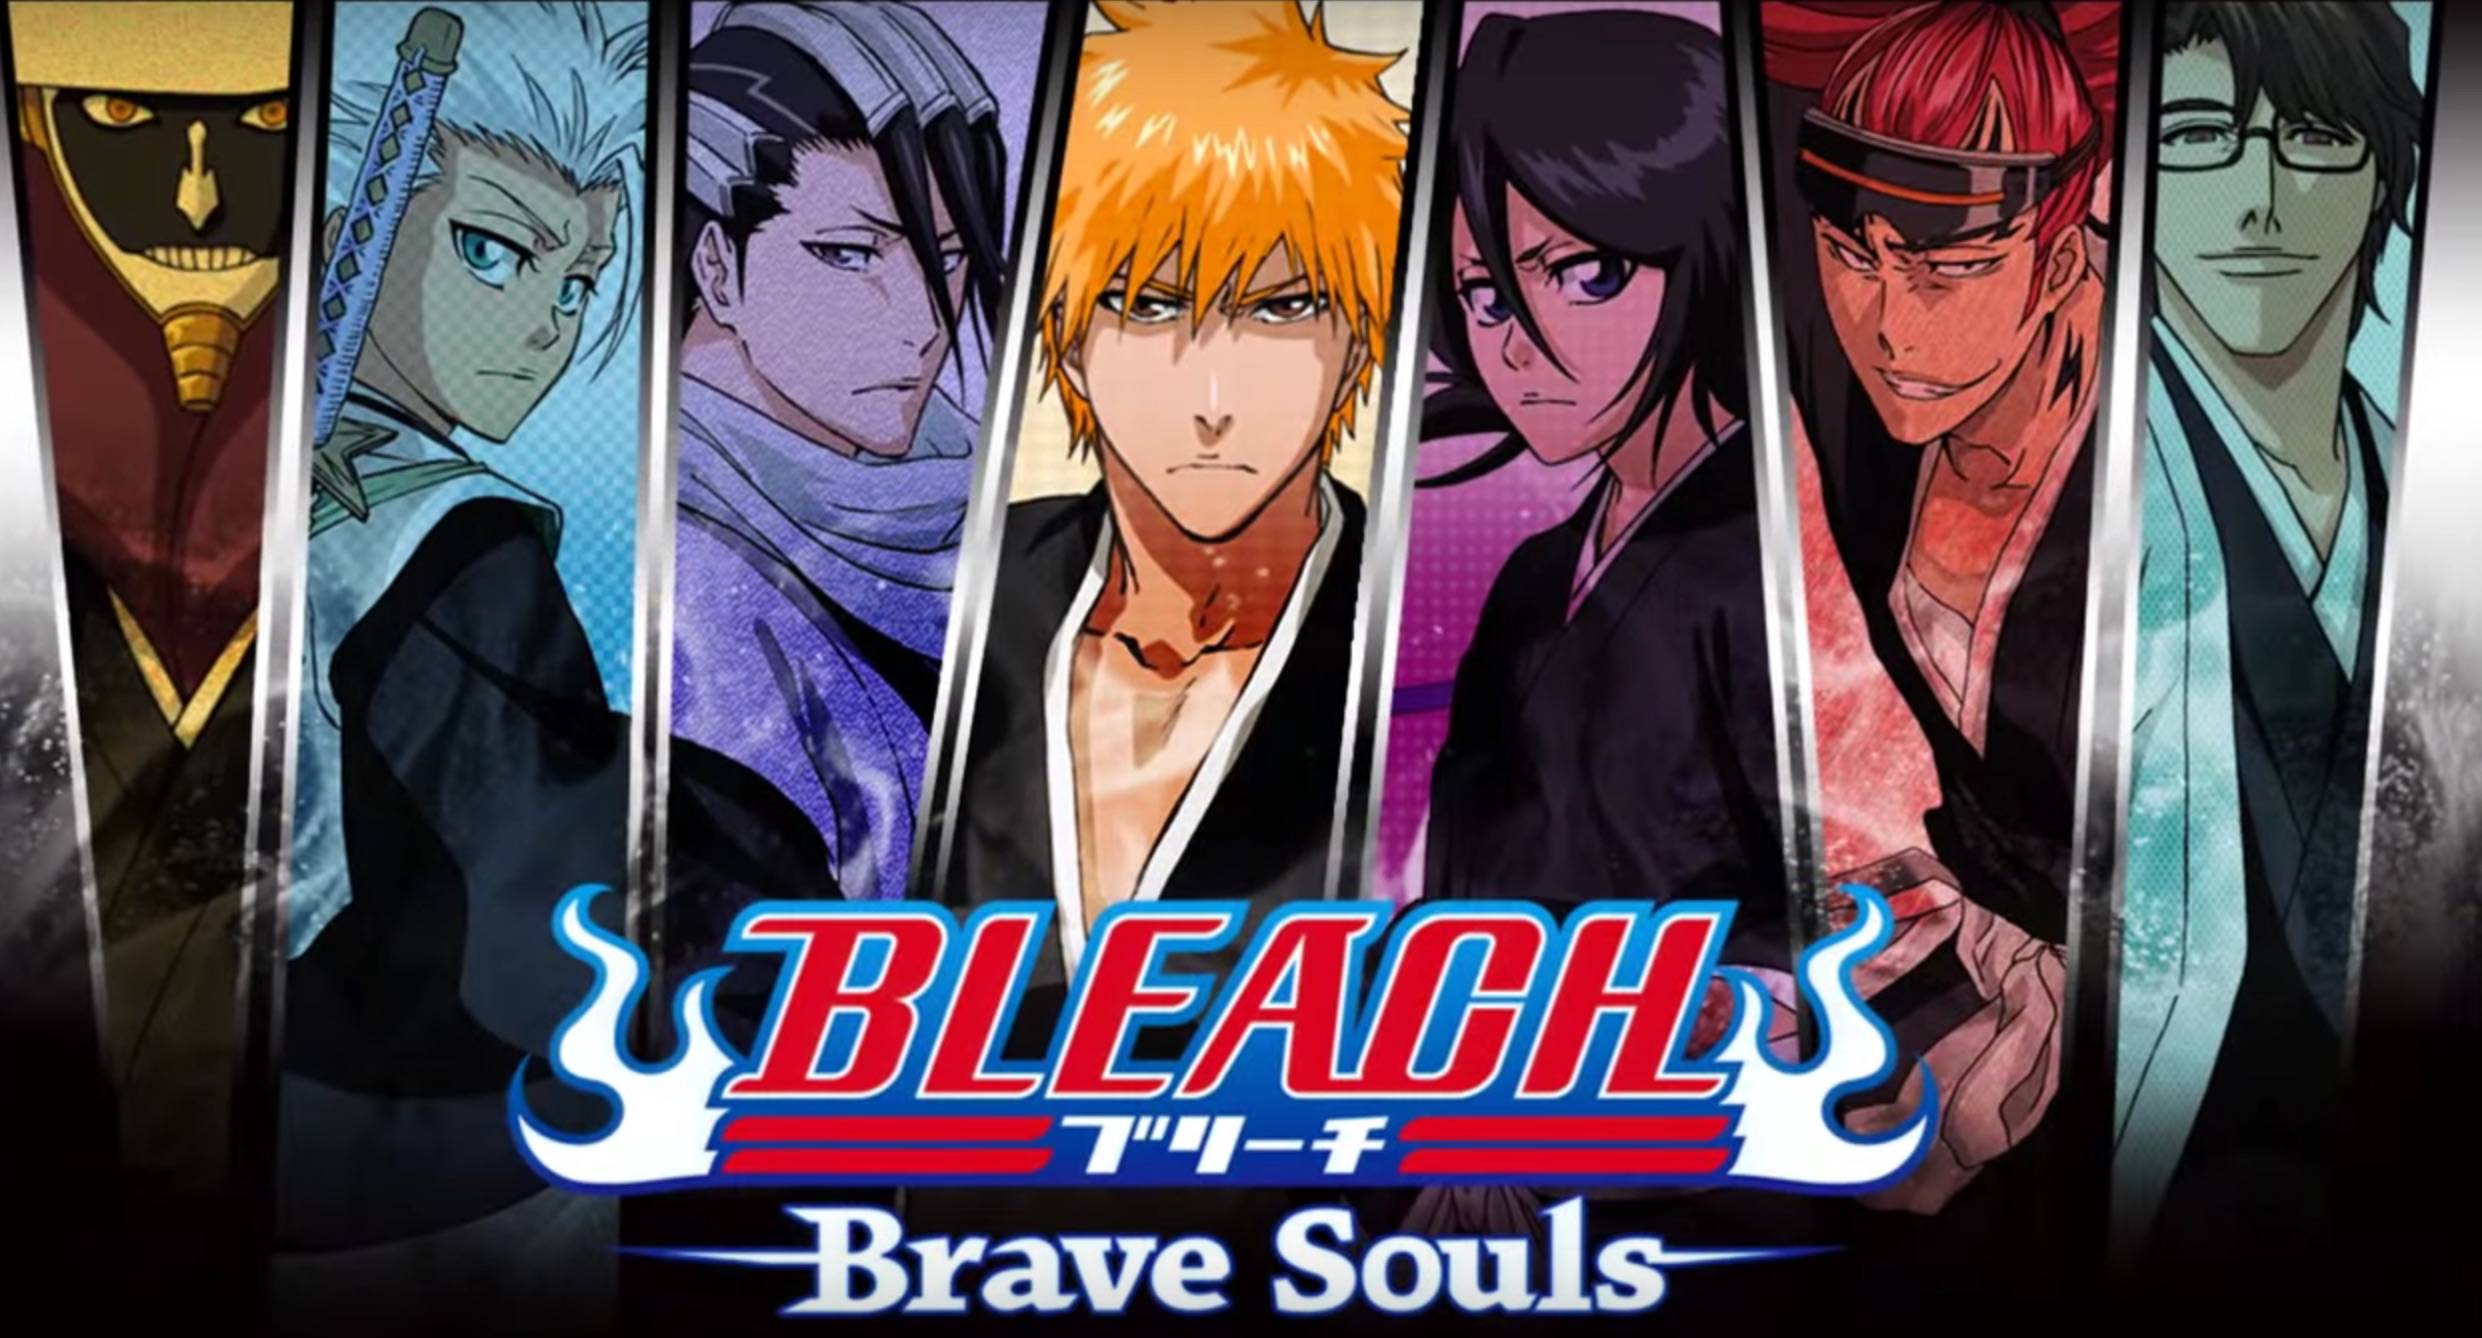 Bleach Brave Souls finally hits US Android devices - Android Community